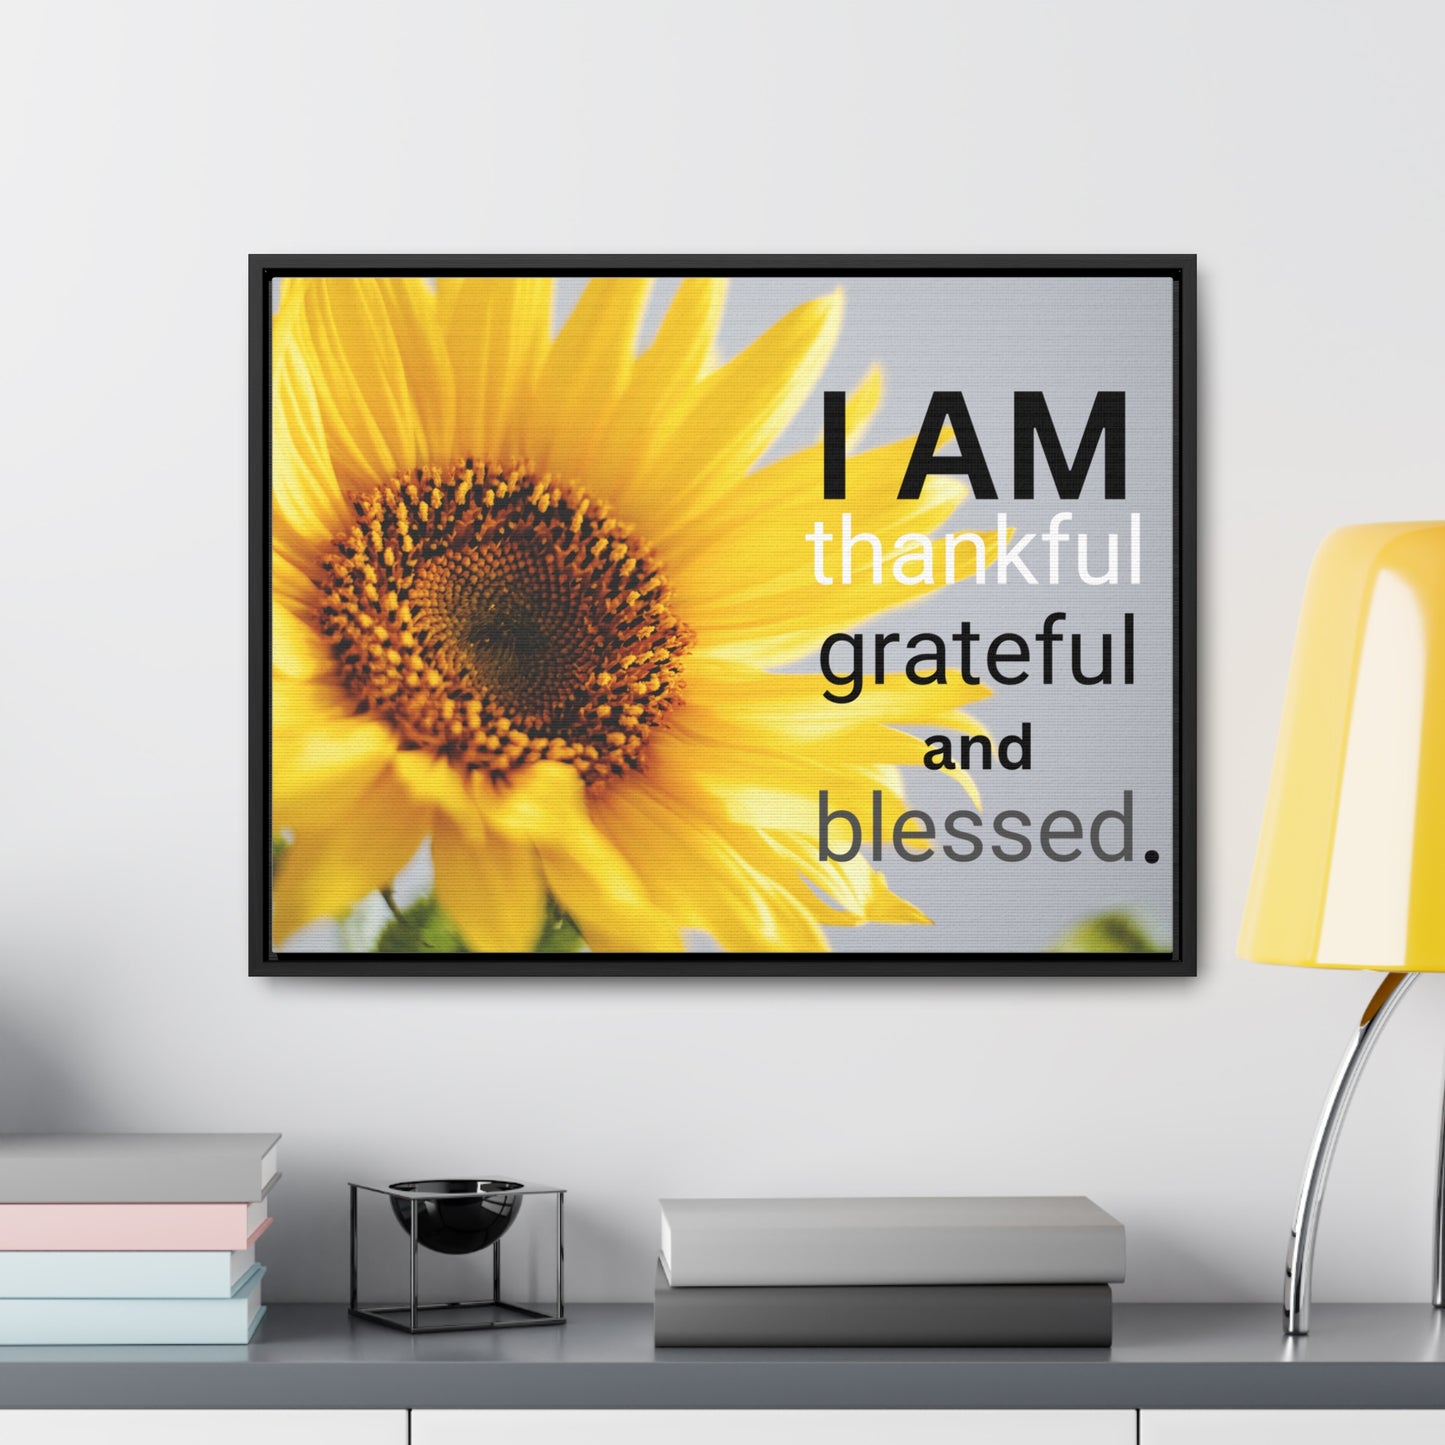 Christian Wall Art: I am Thankful, Grateful and Blessed (Floating Frame)